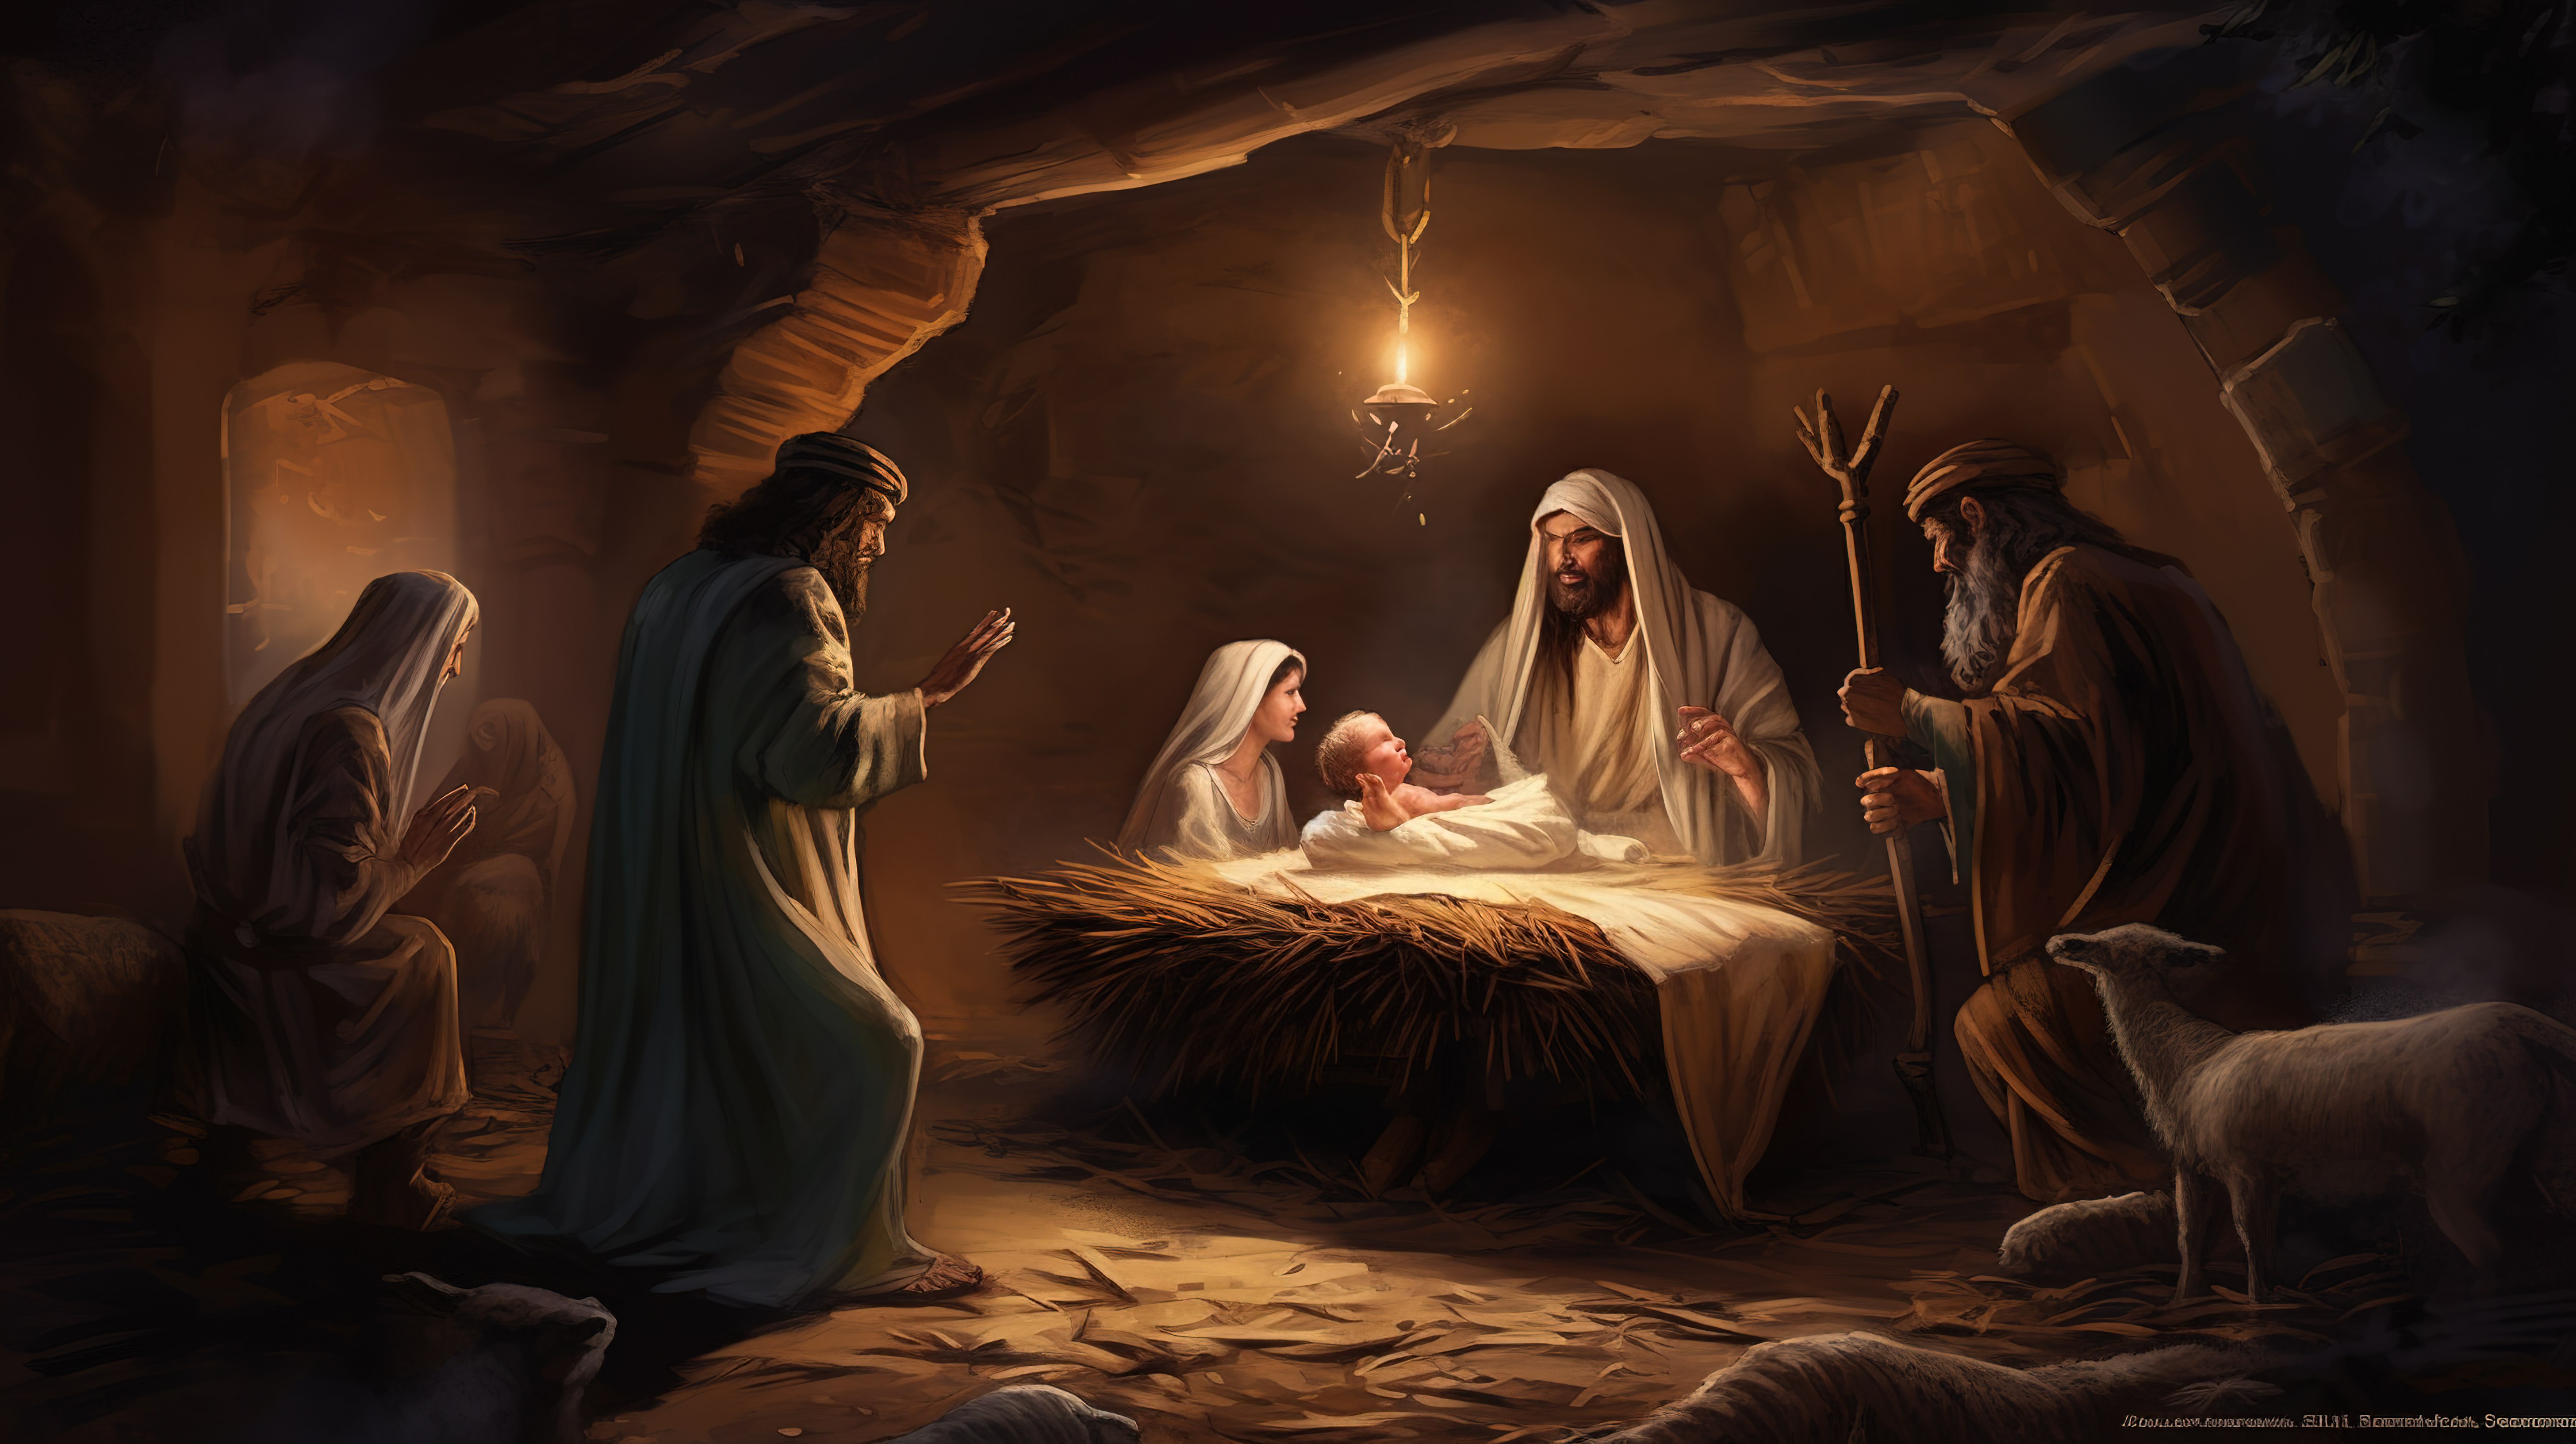 —Pngtree—jesus in the nativity with_3478245.jpg